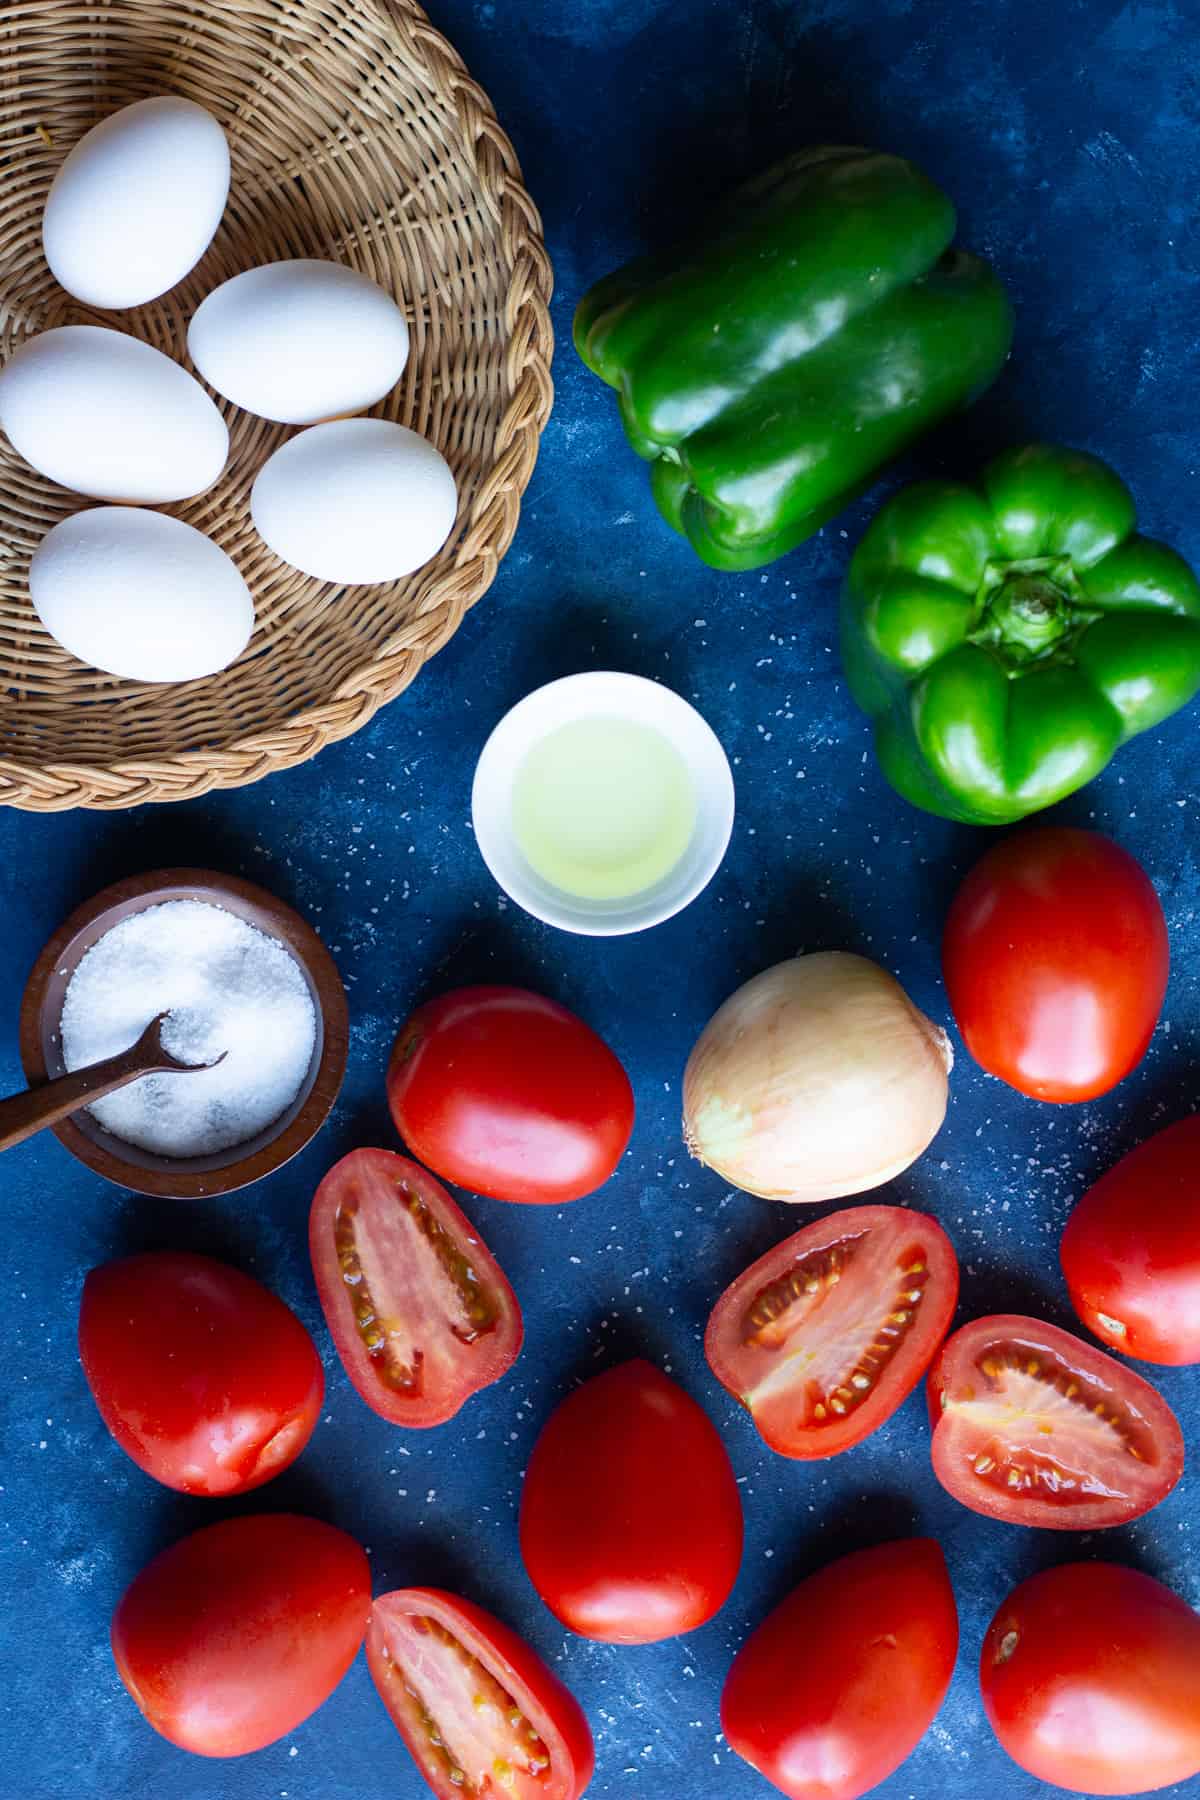 To make turkish tomatoes and eggs you need eggs, tomatoes, oil, pepper, onion and salt. 